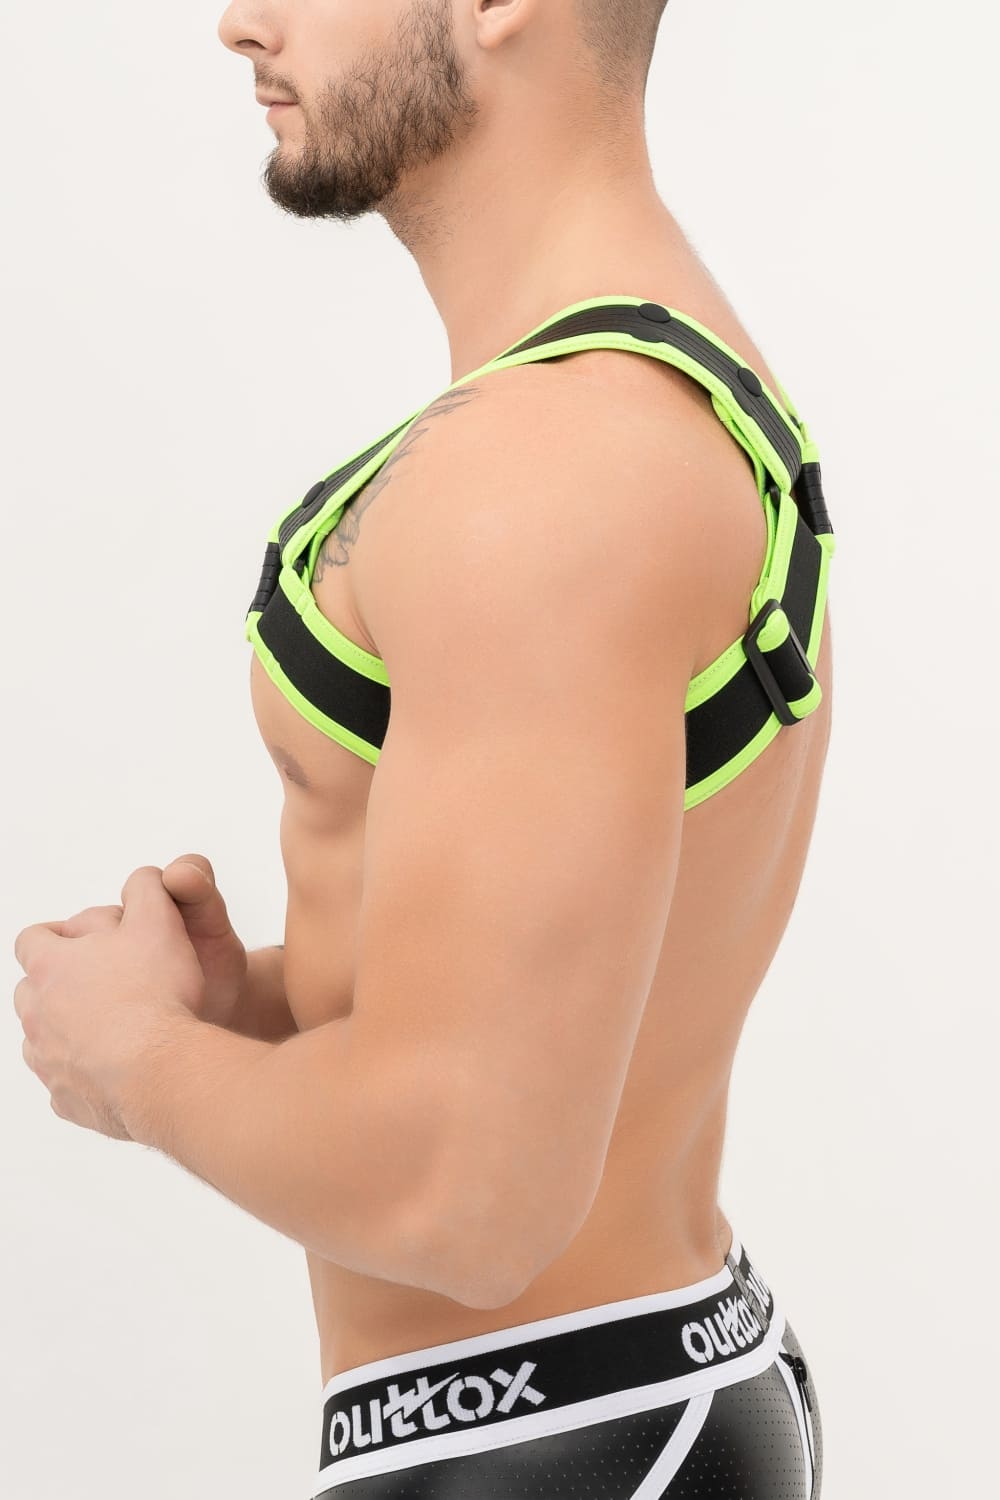 Outtox. Bulldog Harness with Snaps. Black+Green 'Neon'